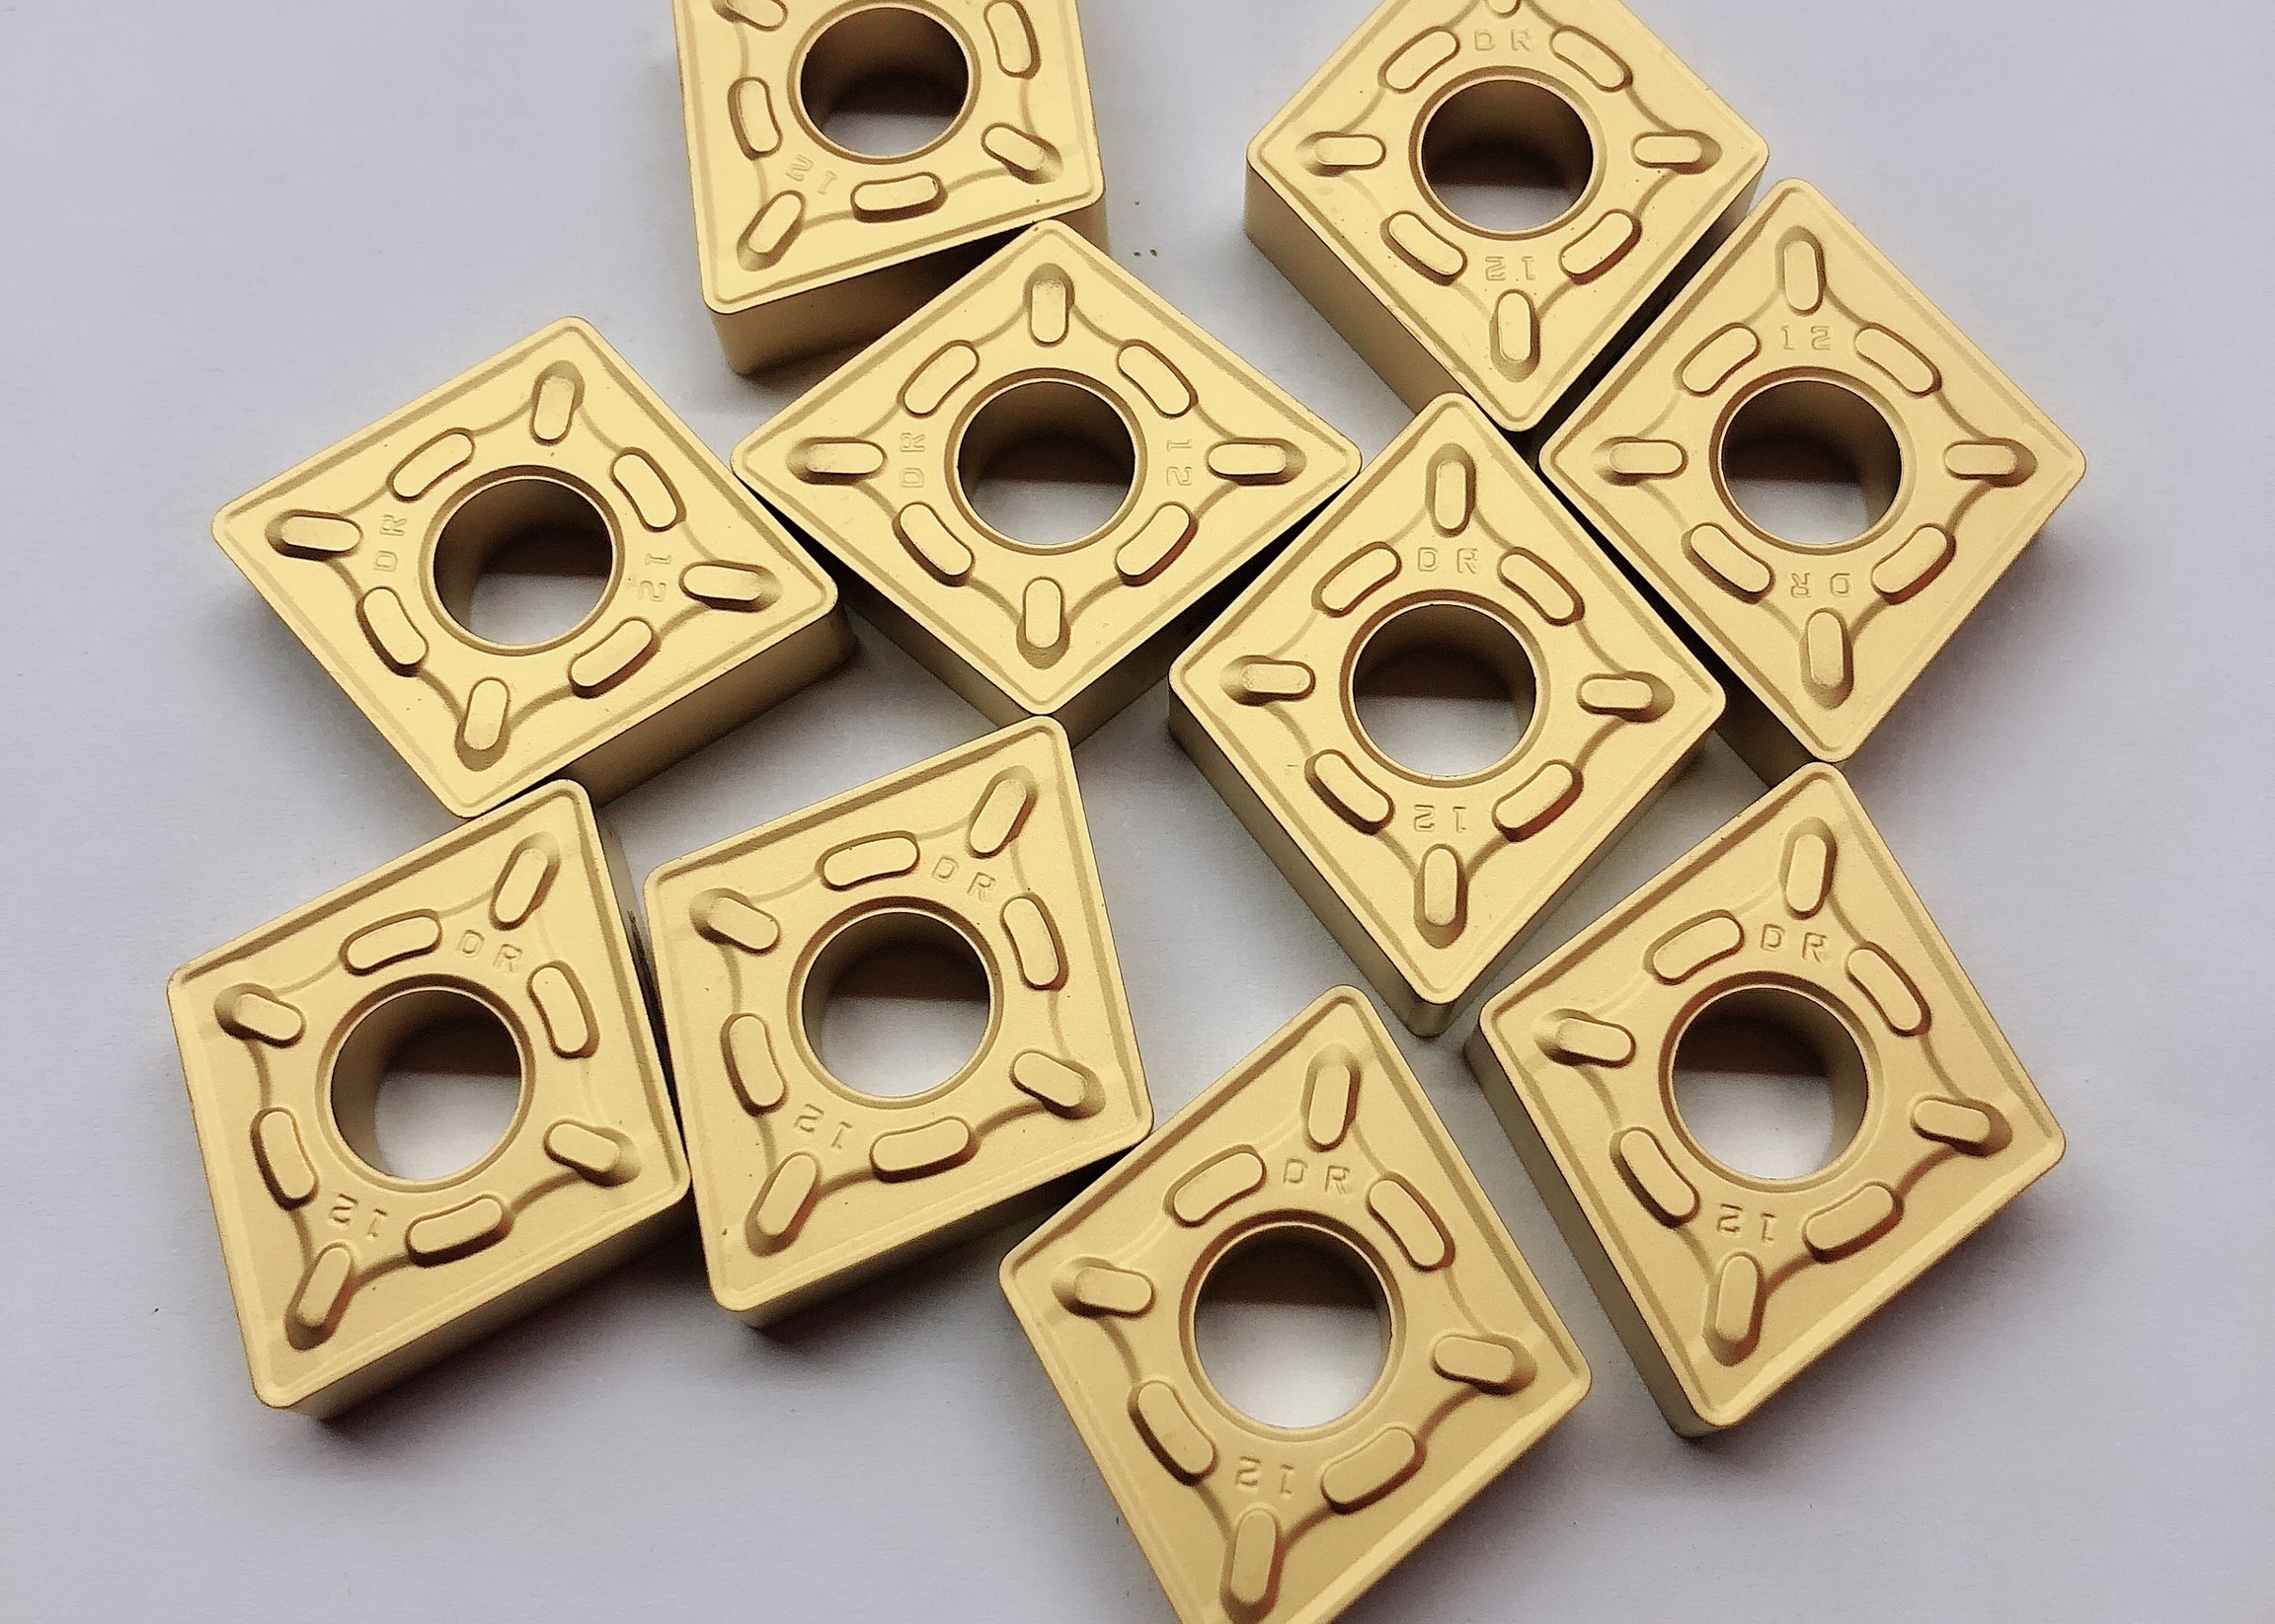 Cnc Tool Parts Carbide Cutting Inserts High Speed For Drilling / Boring